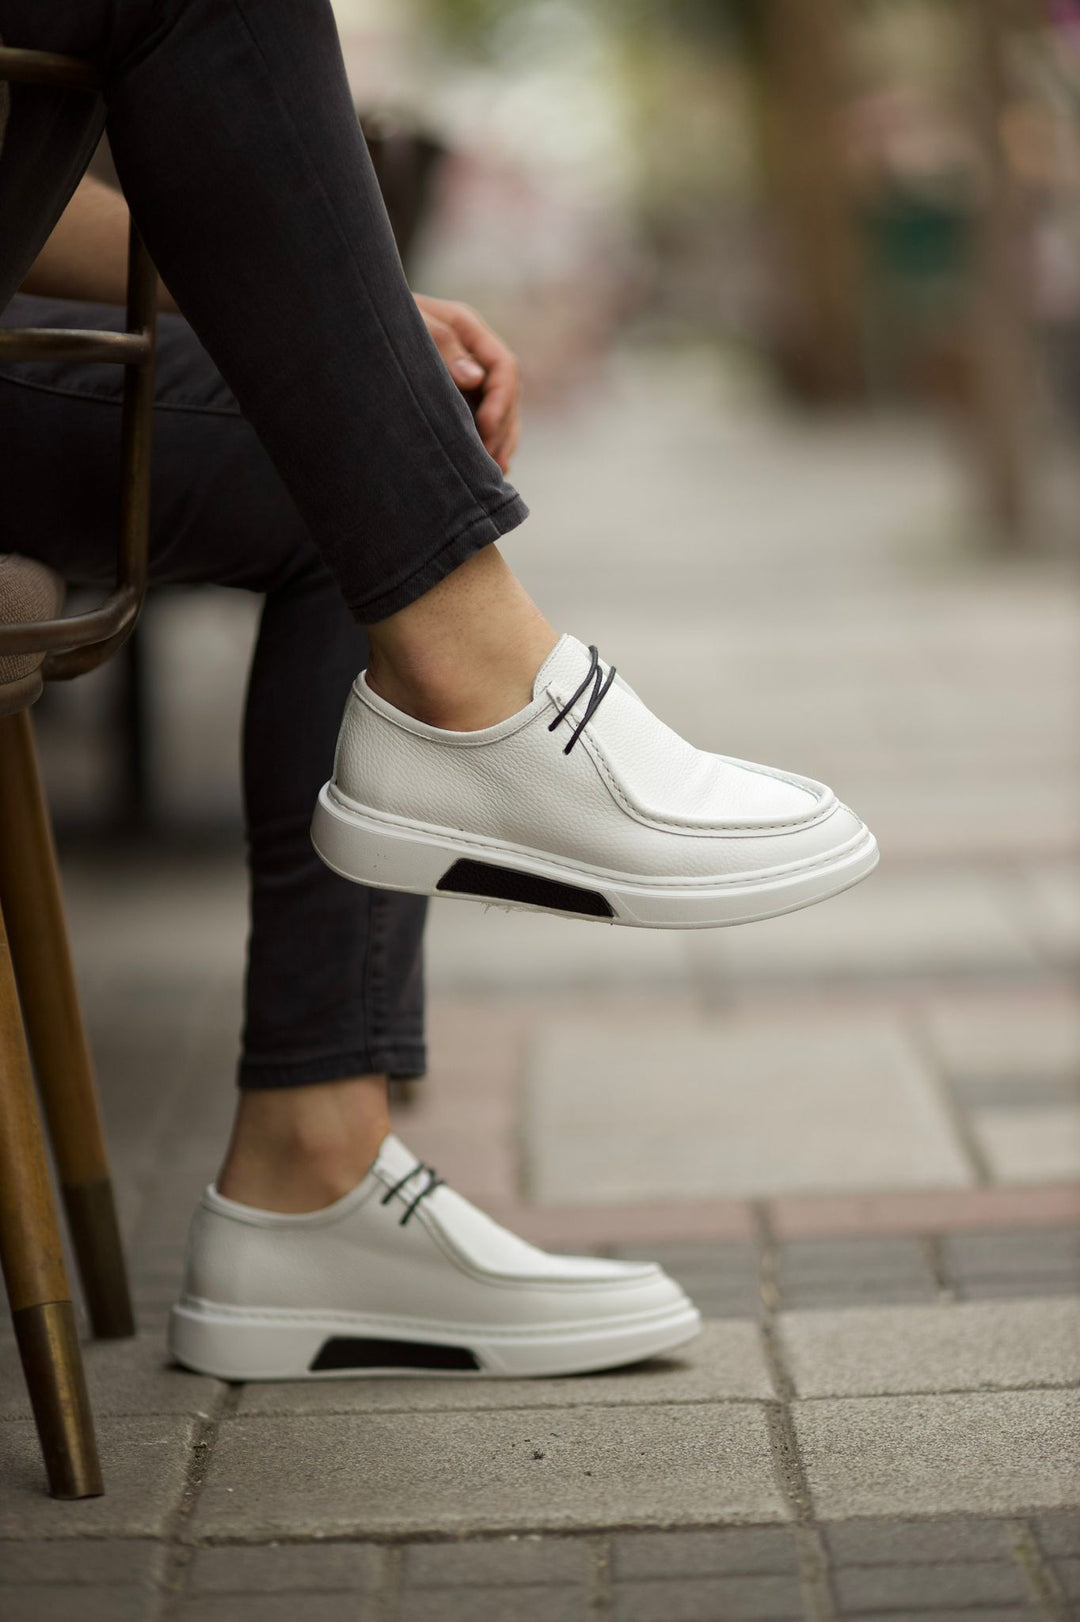 Eva Pool Sole Loafer Casual Shoes - White